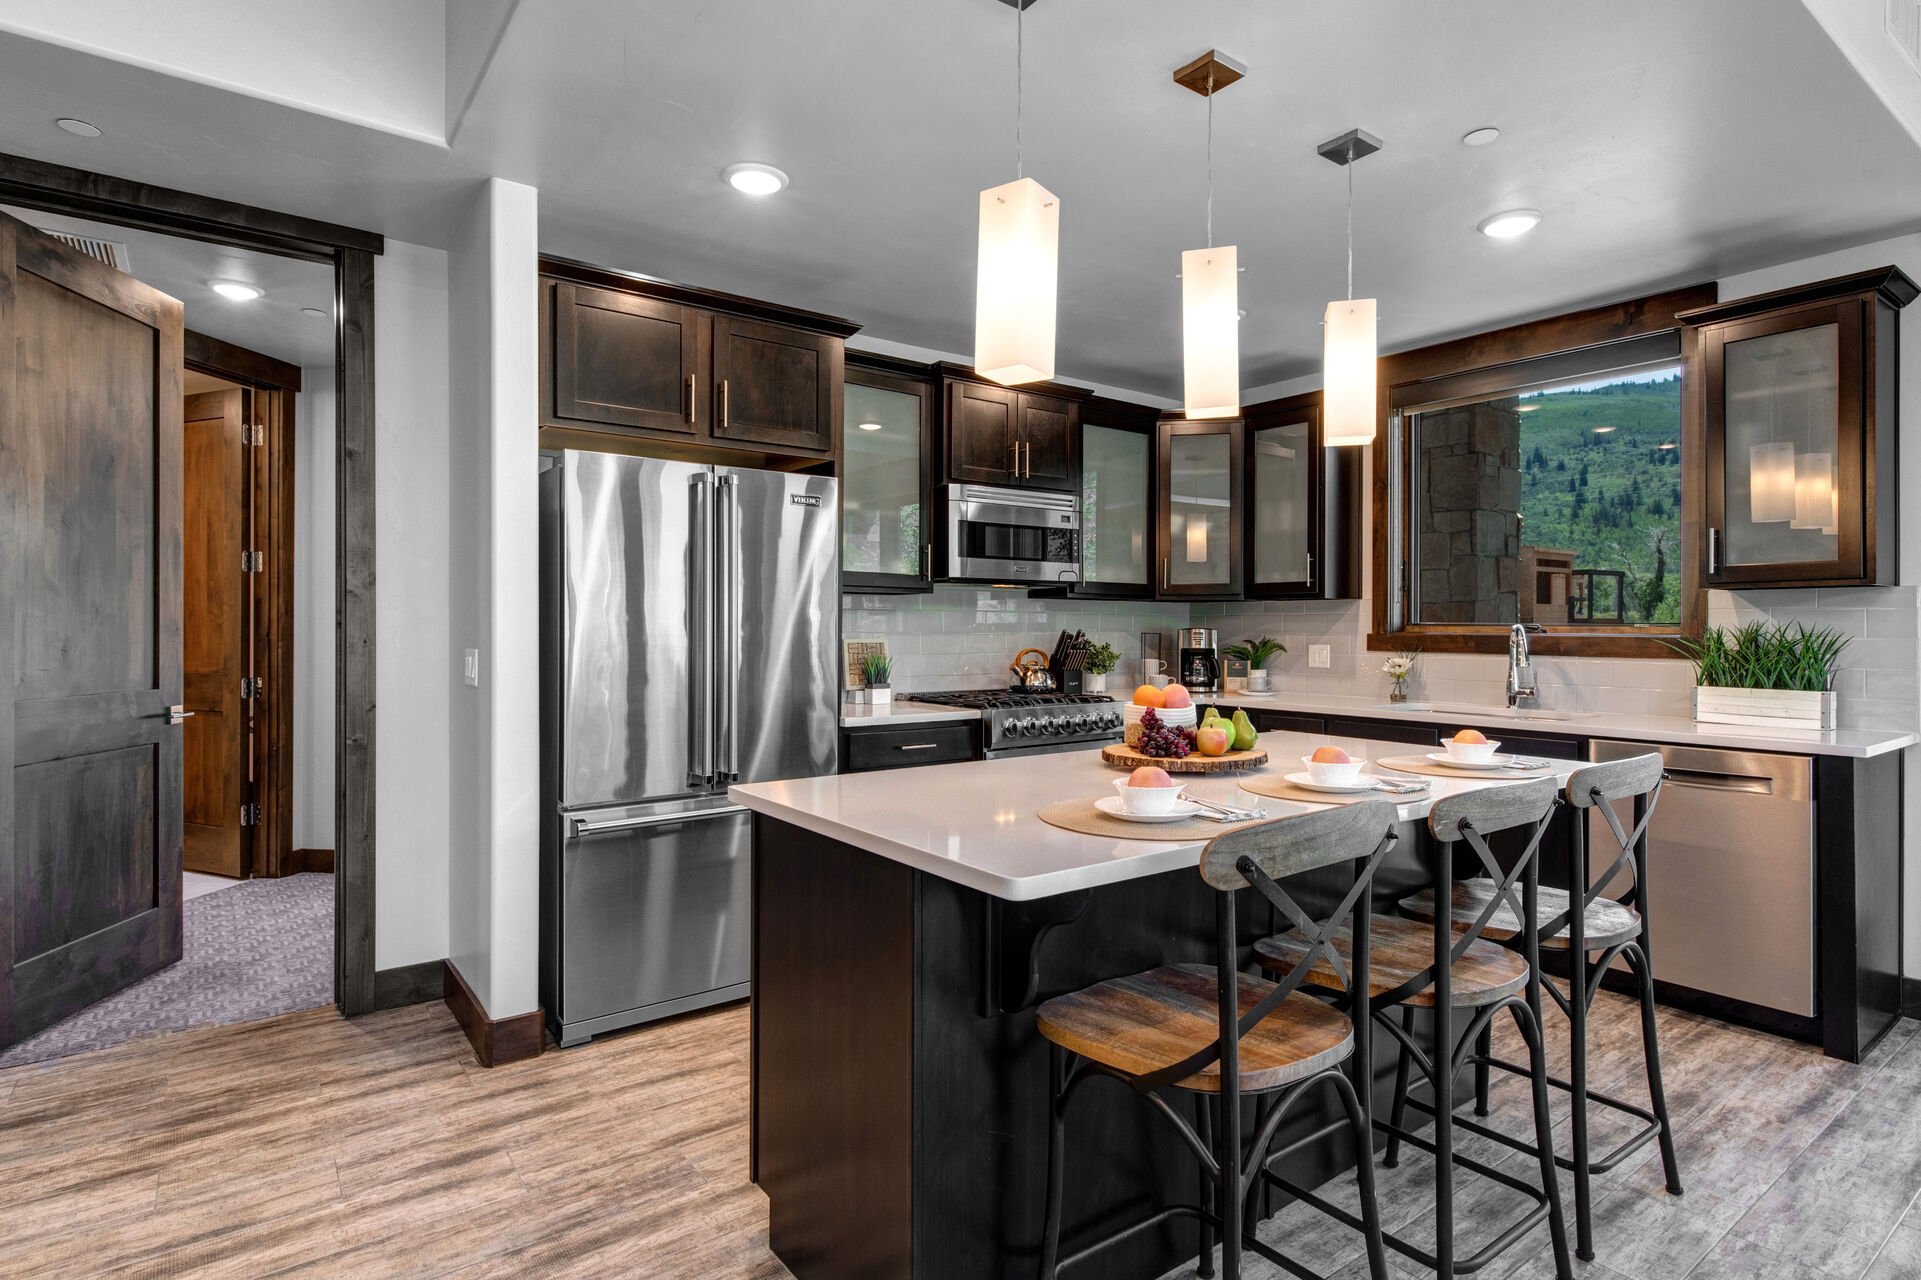 Fully Equipped Kitchen with beautiful stone countertops, stainless steel Viking appliances, and island seating for three